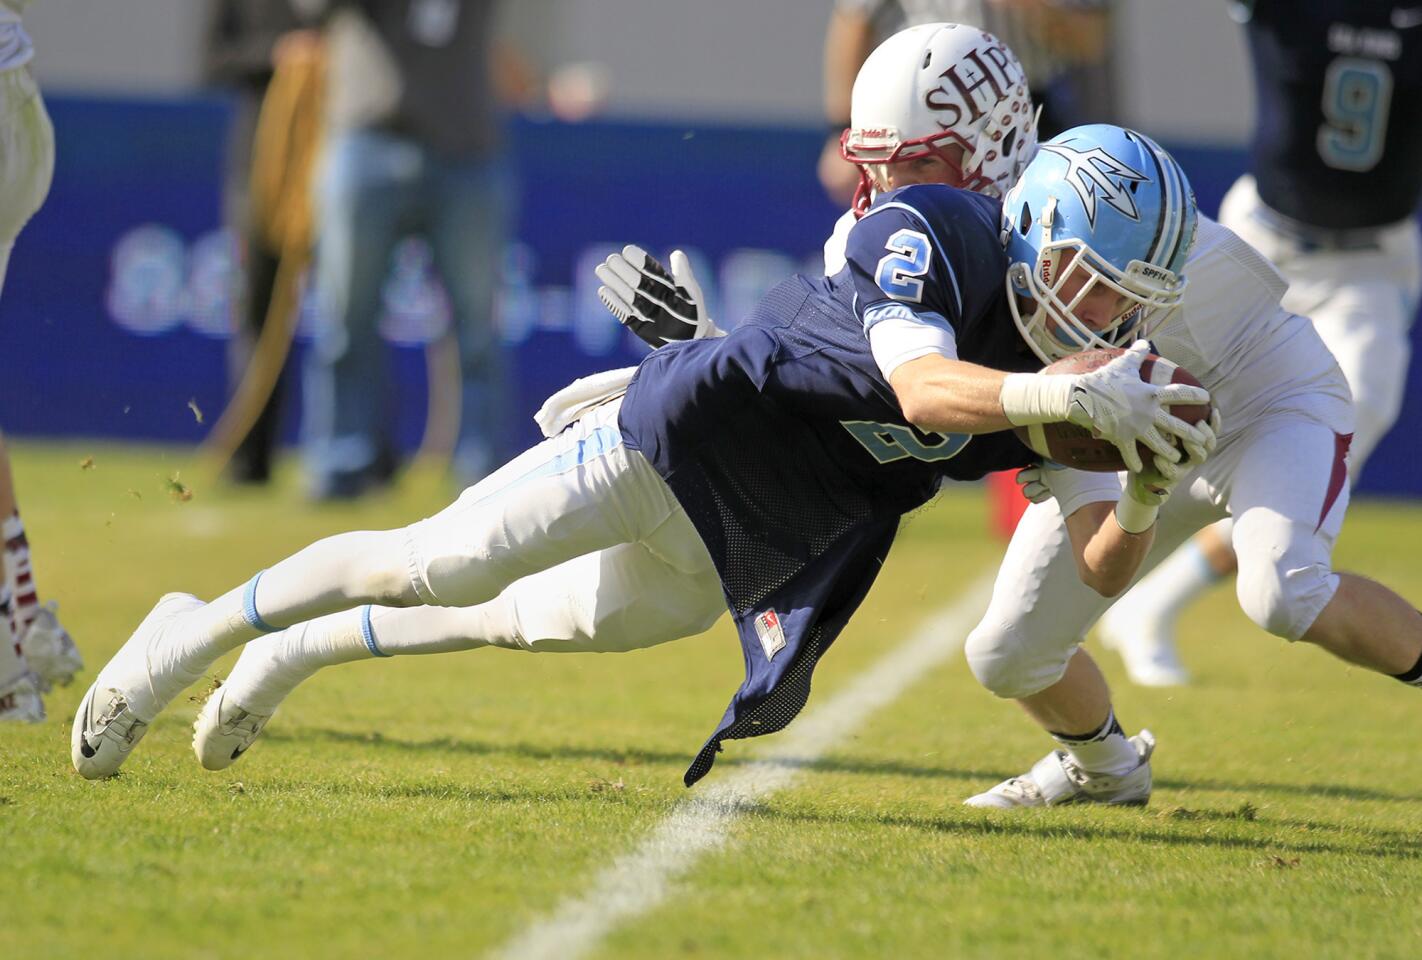 Corona del Mar High's Bo St. Geme (2) dives in for the first touchdown of the game during the first half against Sacred Heart Prep in the 2013 CIF State Football Division III Bowl Championship Game at StubHub Center in Carson on Saturday. (Kevin Chang/ Daily Pilot)